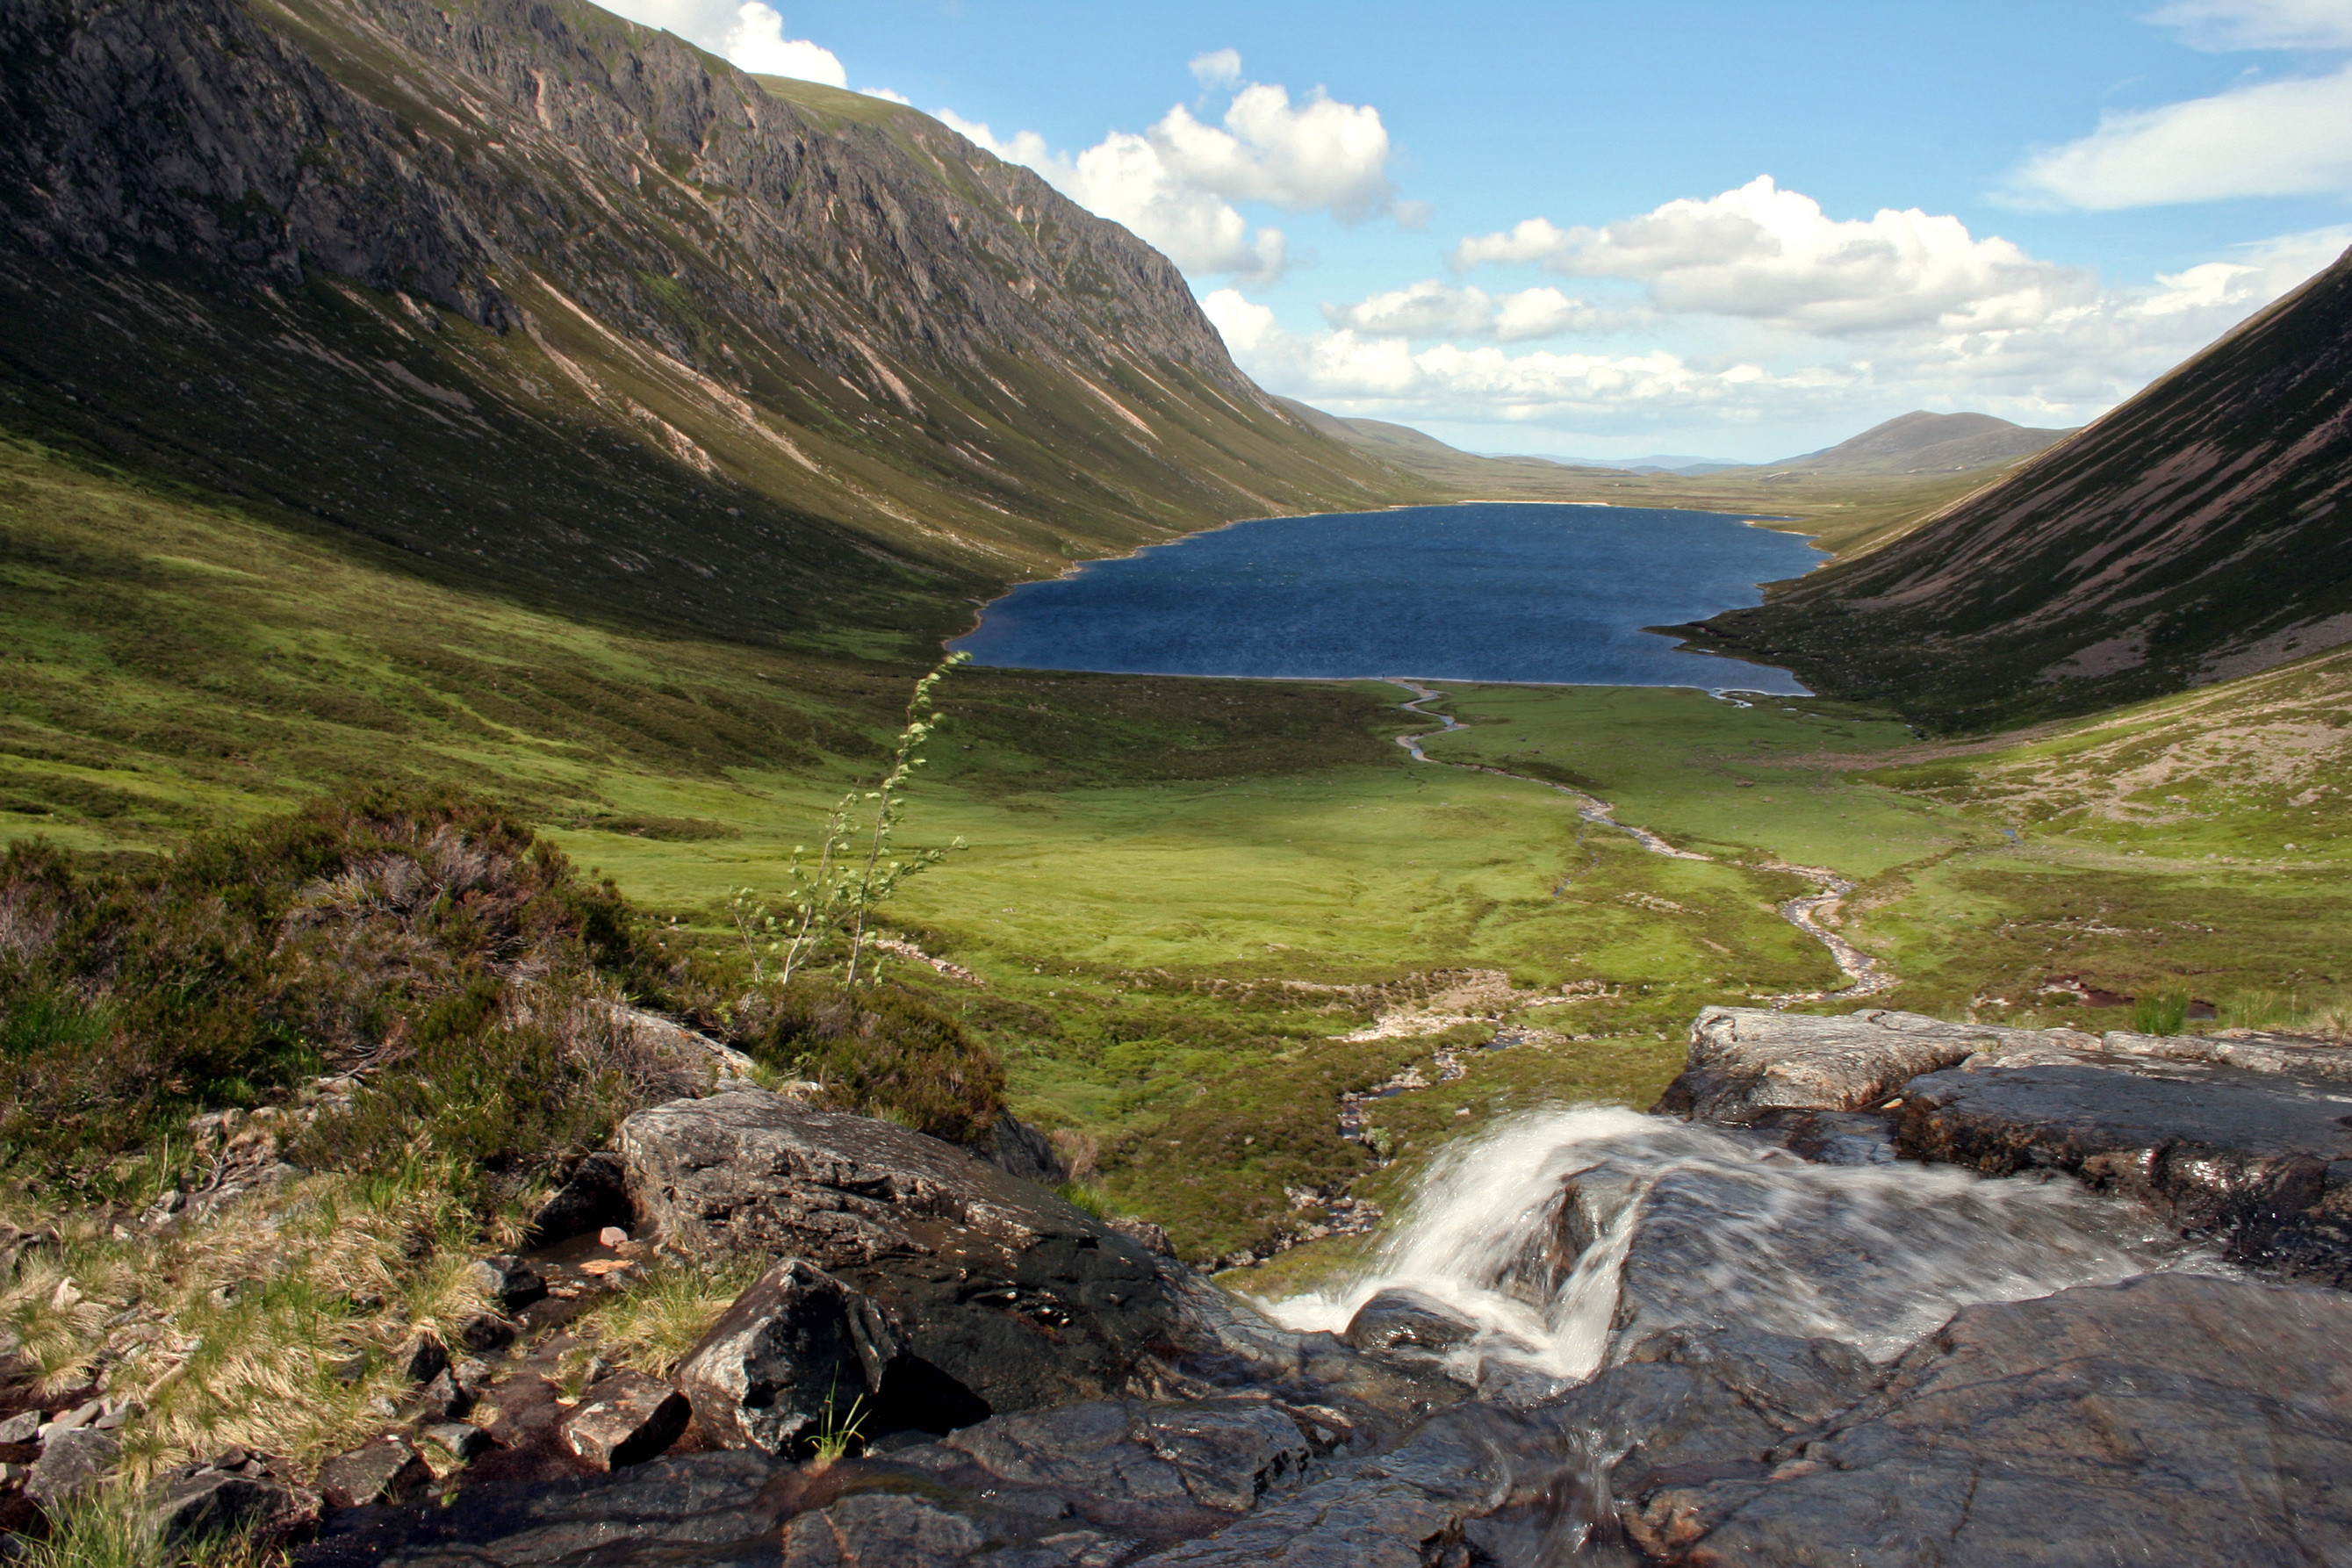 Overlooking a steep sloping drop into a coire. Loch Einich can be seen within this coire, in the top 50% of the image.